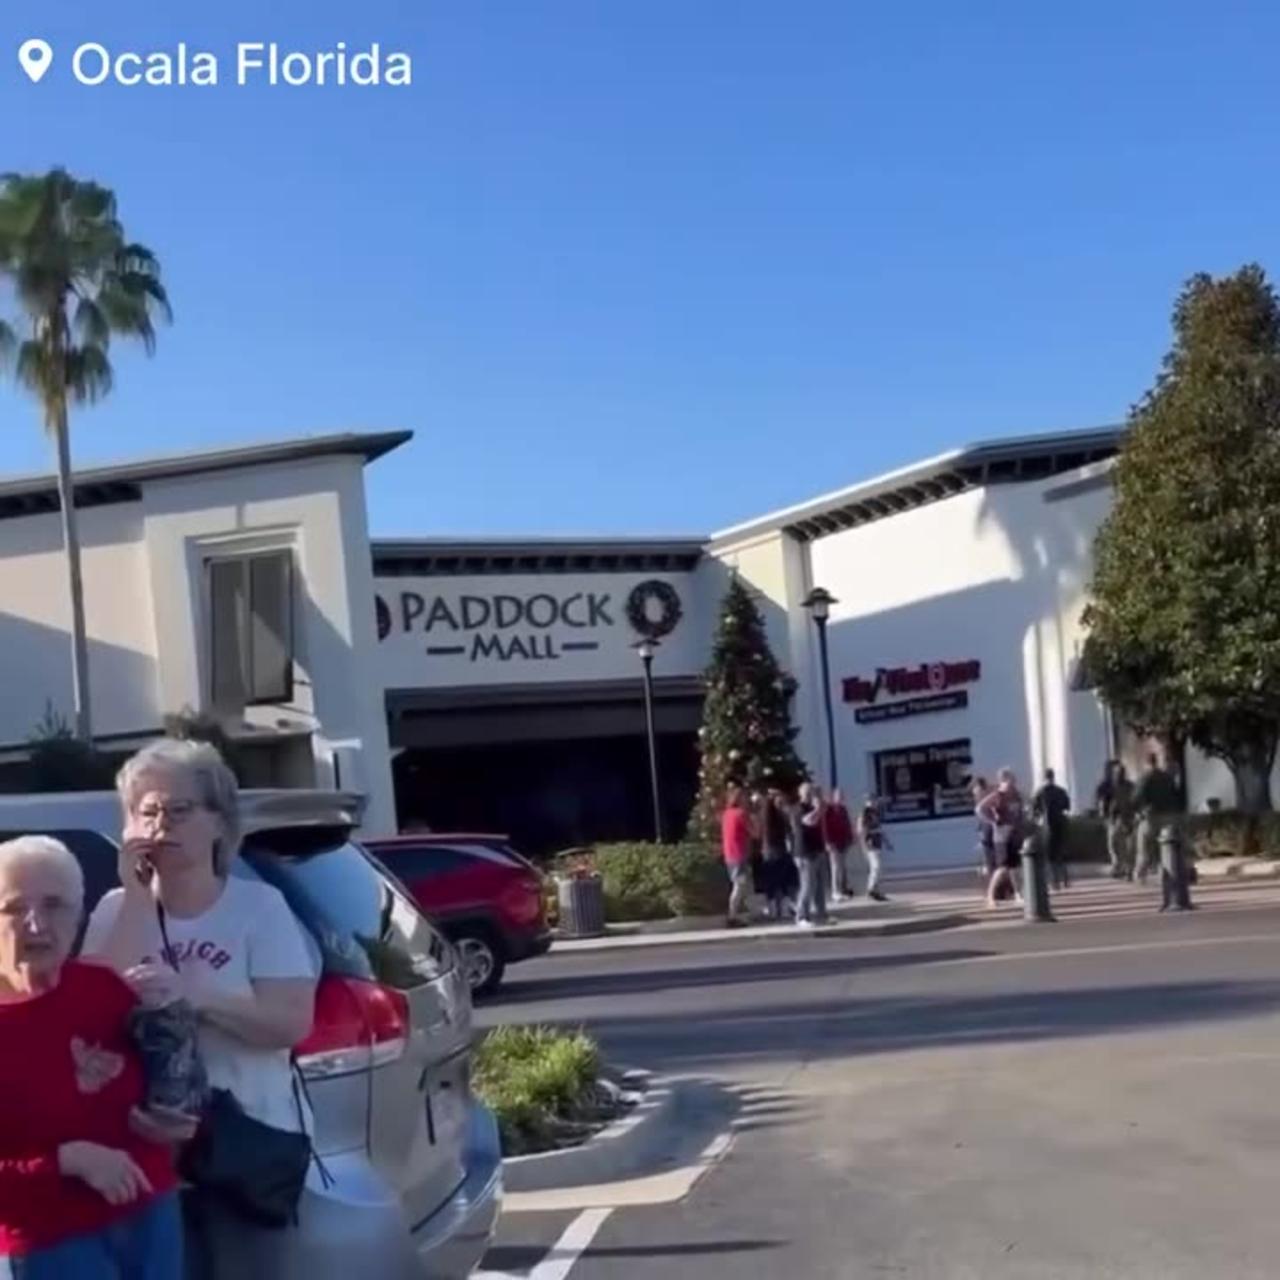 At least one dead, multiple injured after shooting at Paddock Mall in Ocala